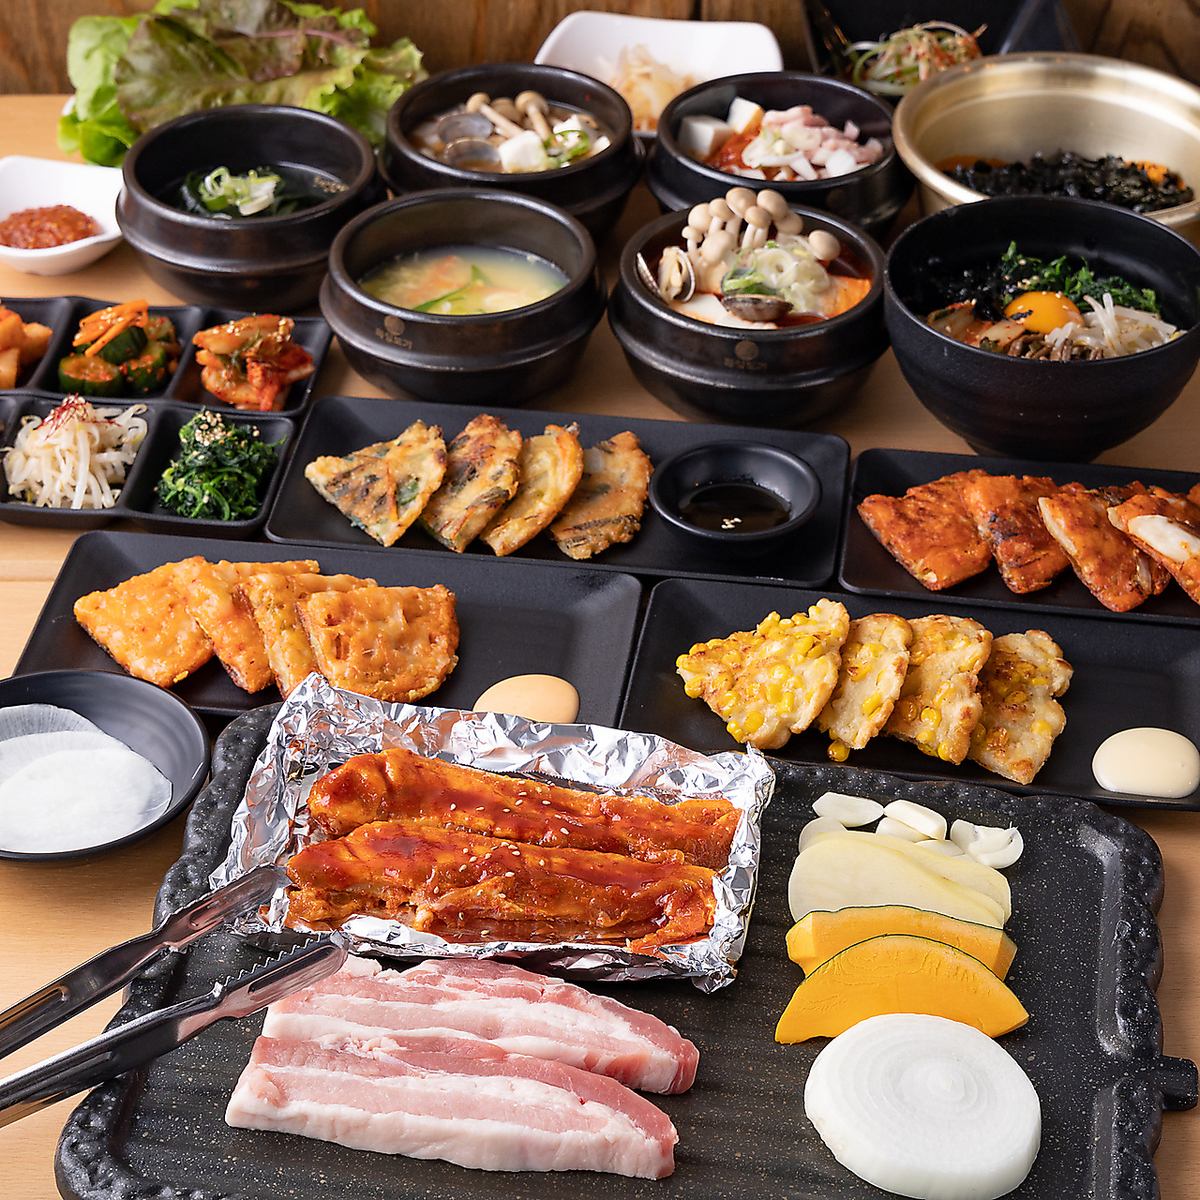 All-you-can-eat pork ribs and classic samgyeopsal course 2387 yen ~ ♪